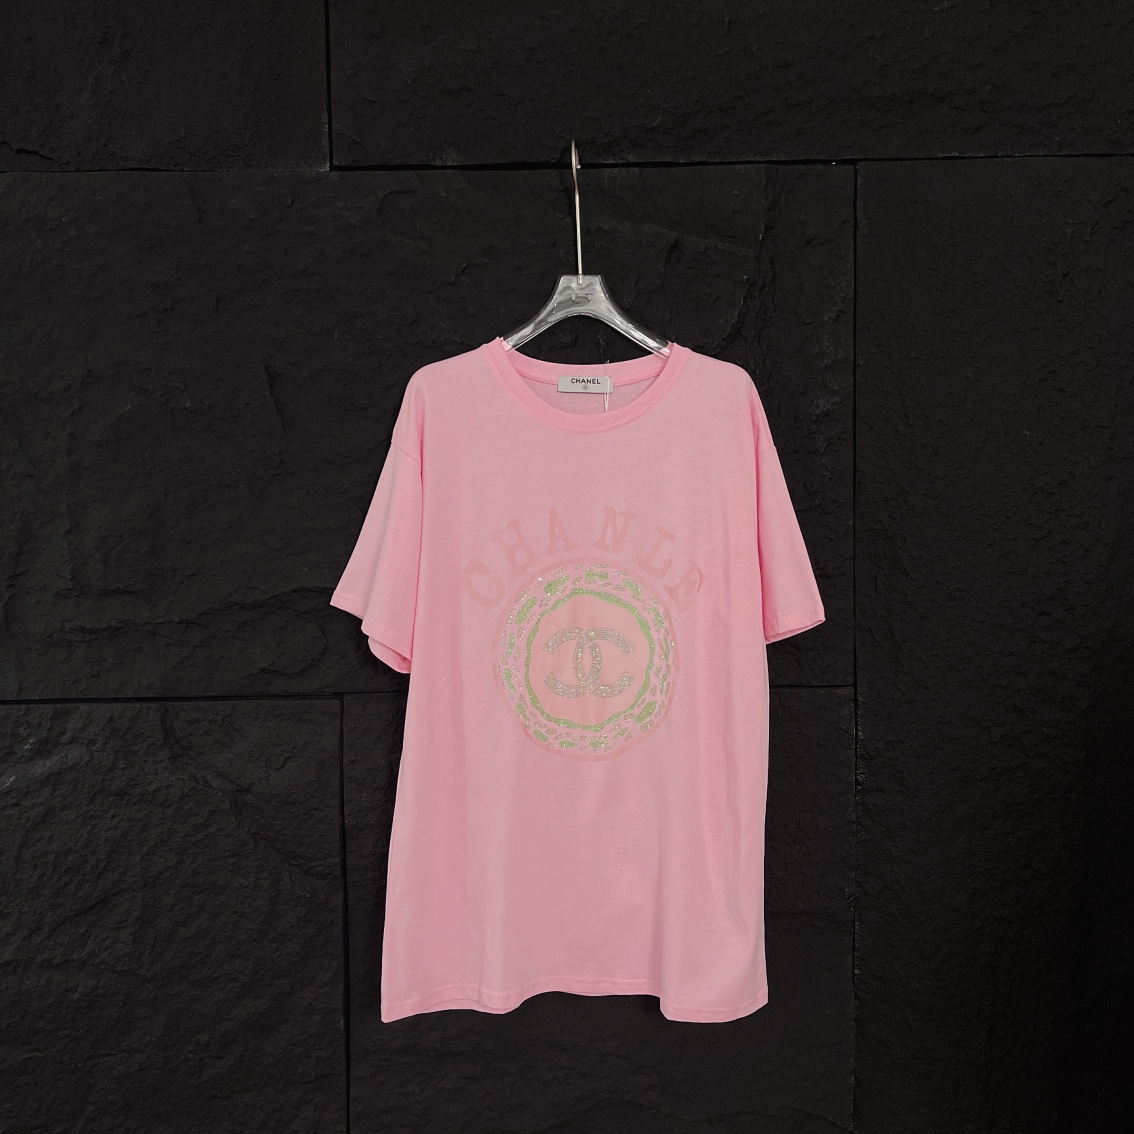 Chanel Clothing T-Shirt Pink White Summer Collection Short Sleeve